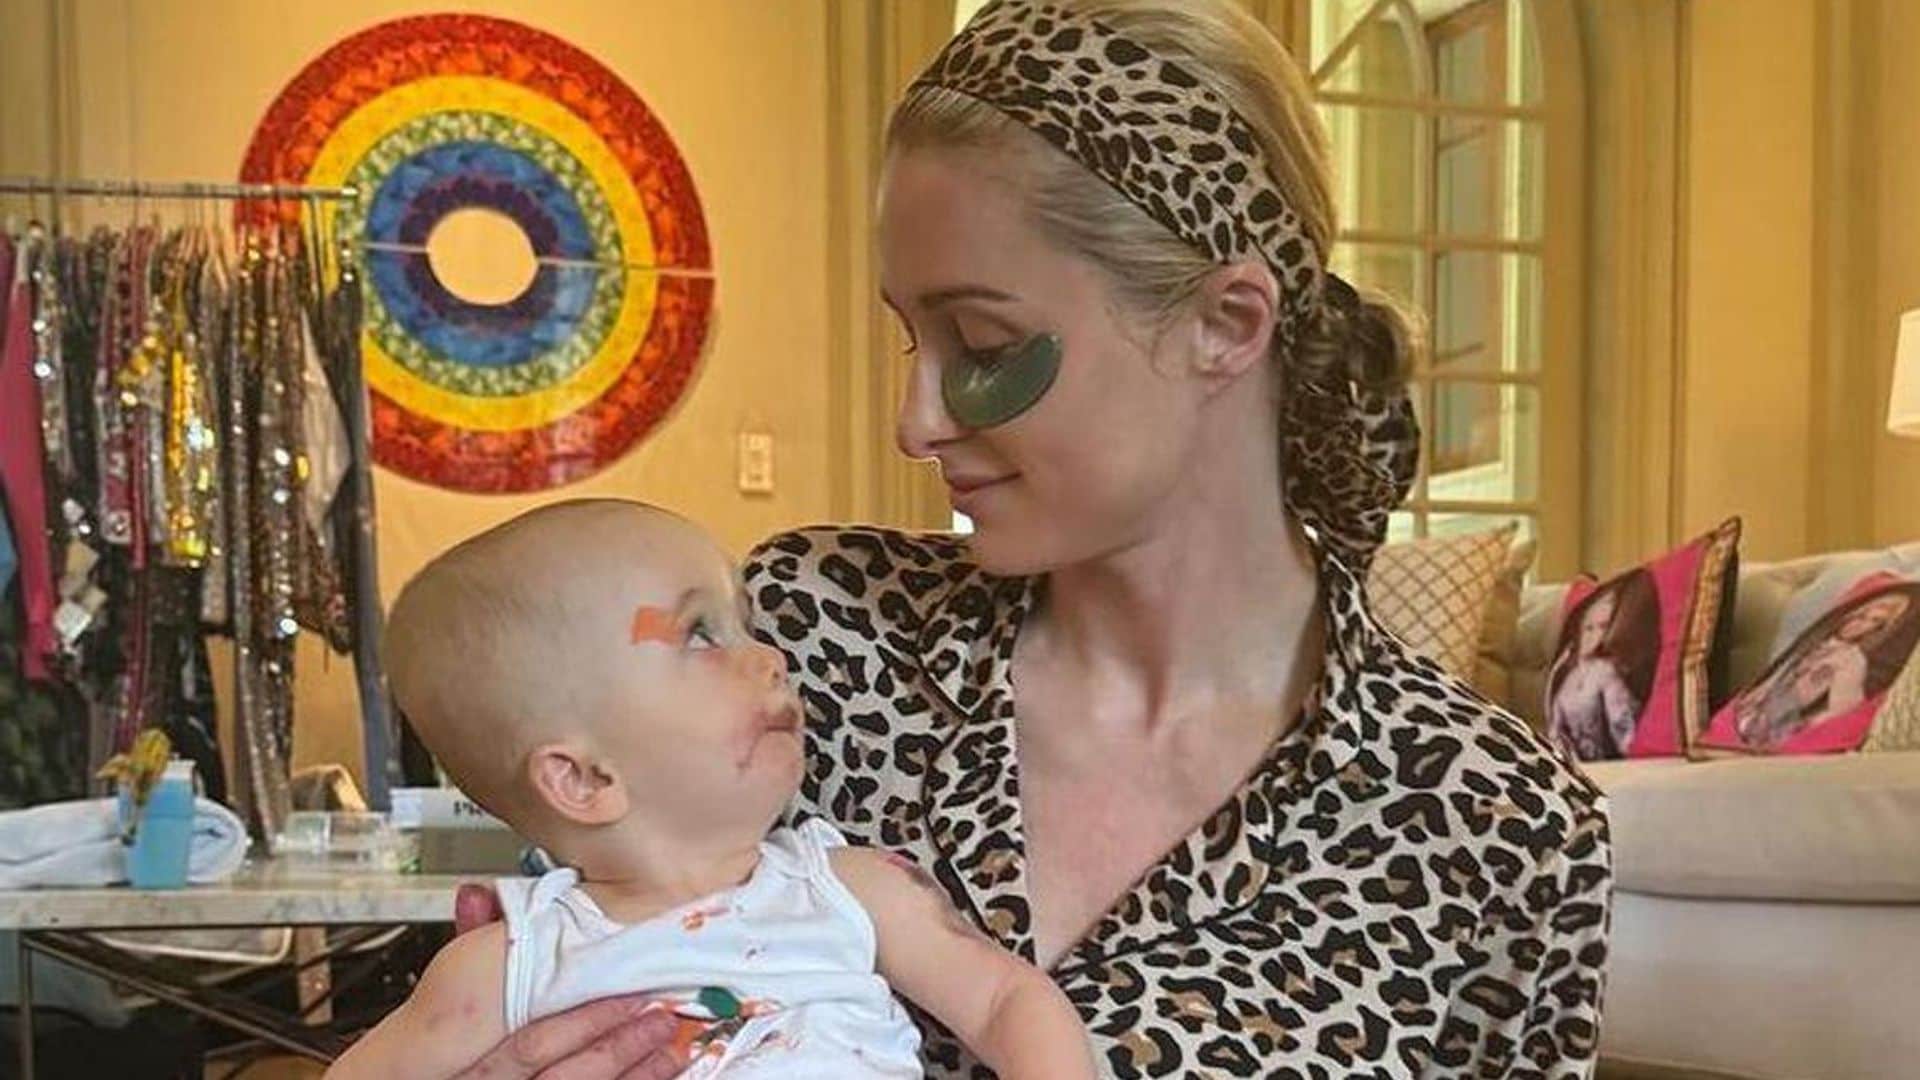 Paris Hilton responds to concerns about her baby’s crib